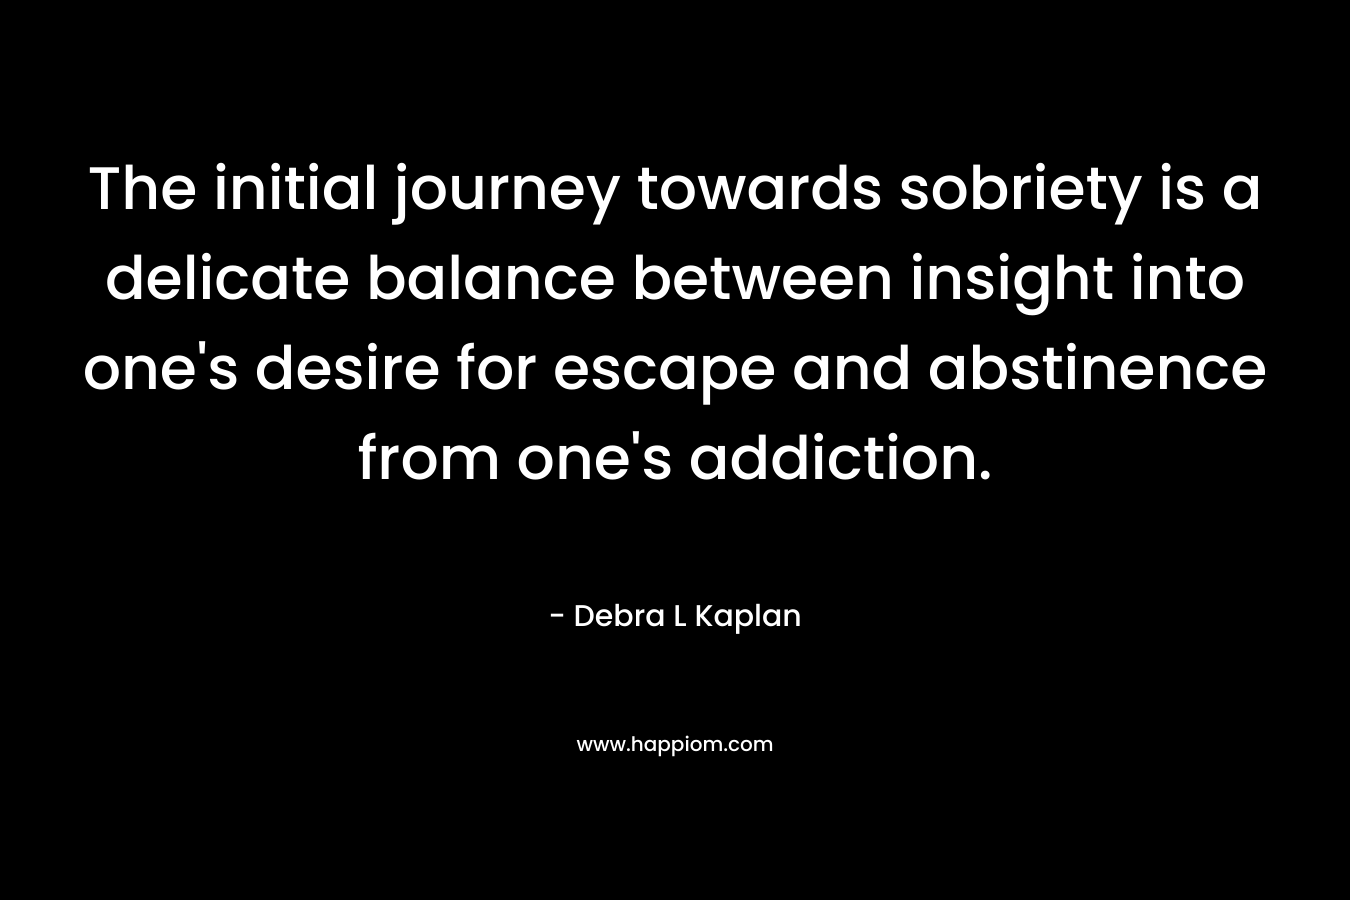 The initial journey towards sobriety is a delicate balance between insight into one's desire for escape and abstinence from one's addiction.